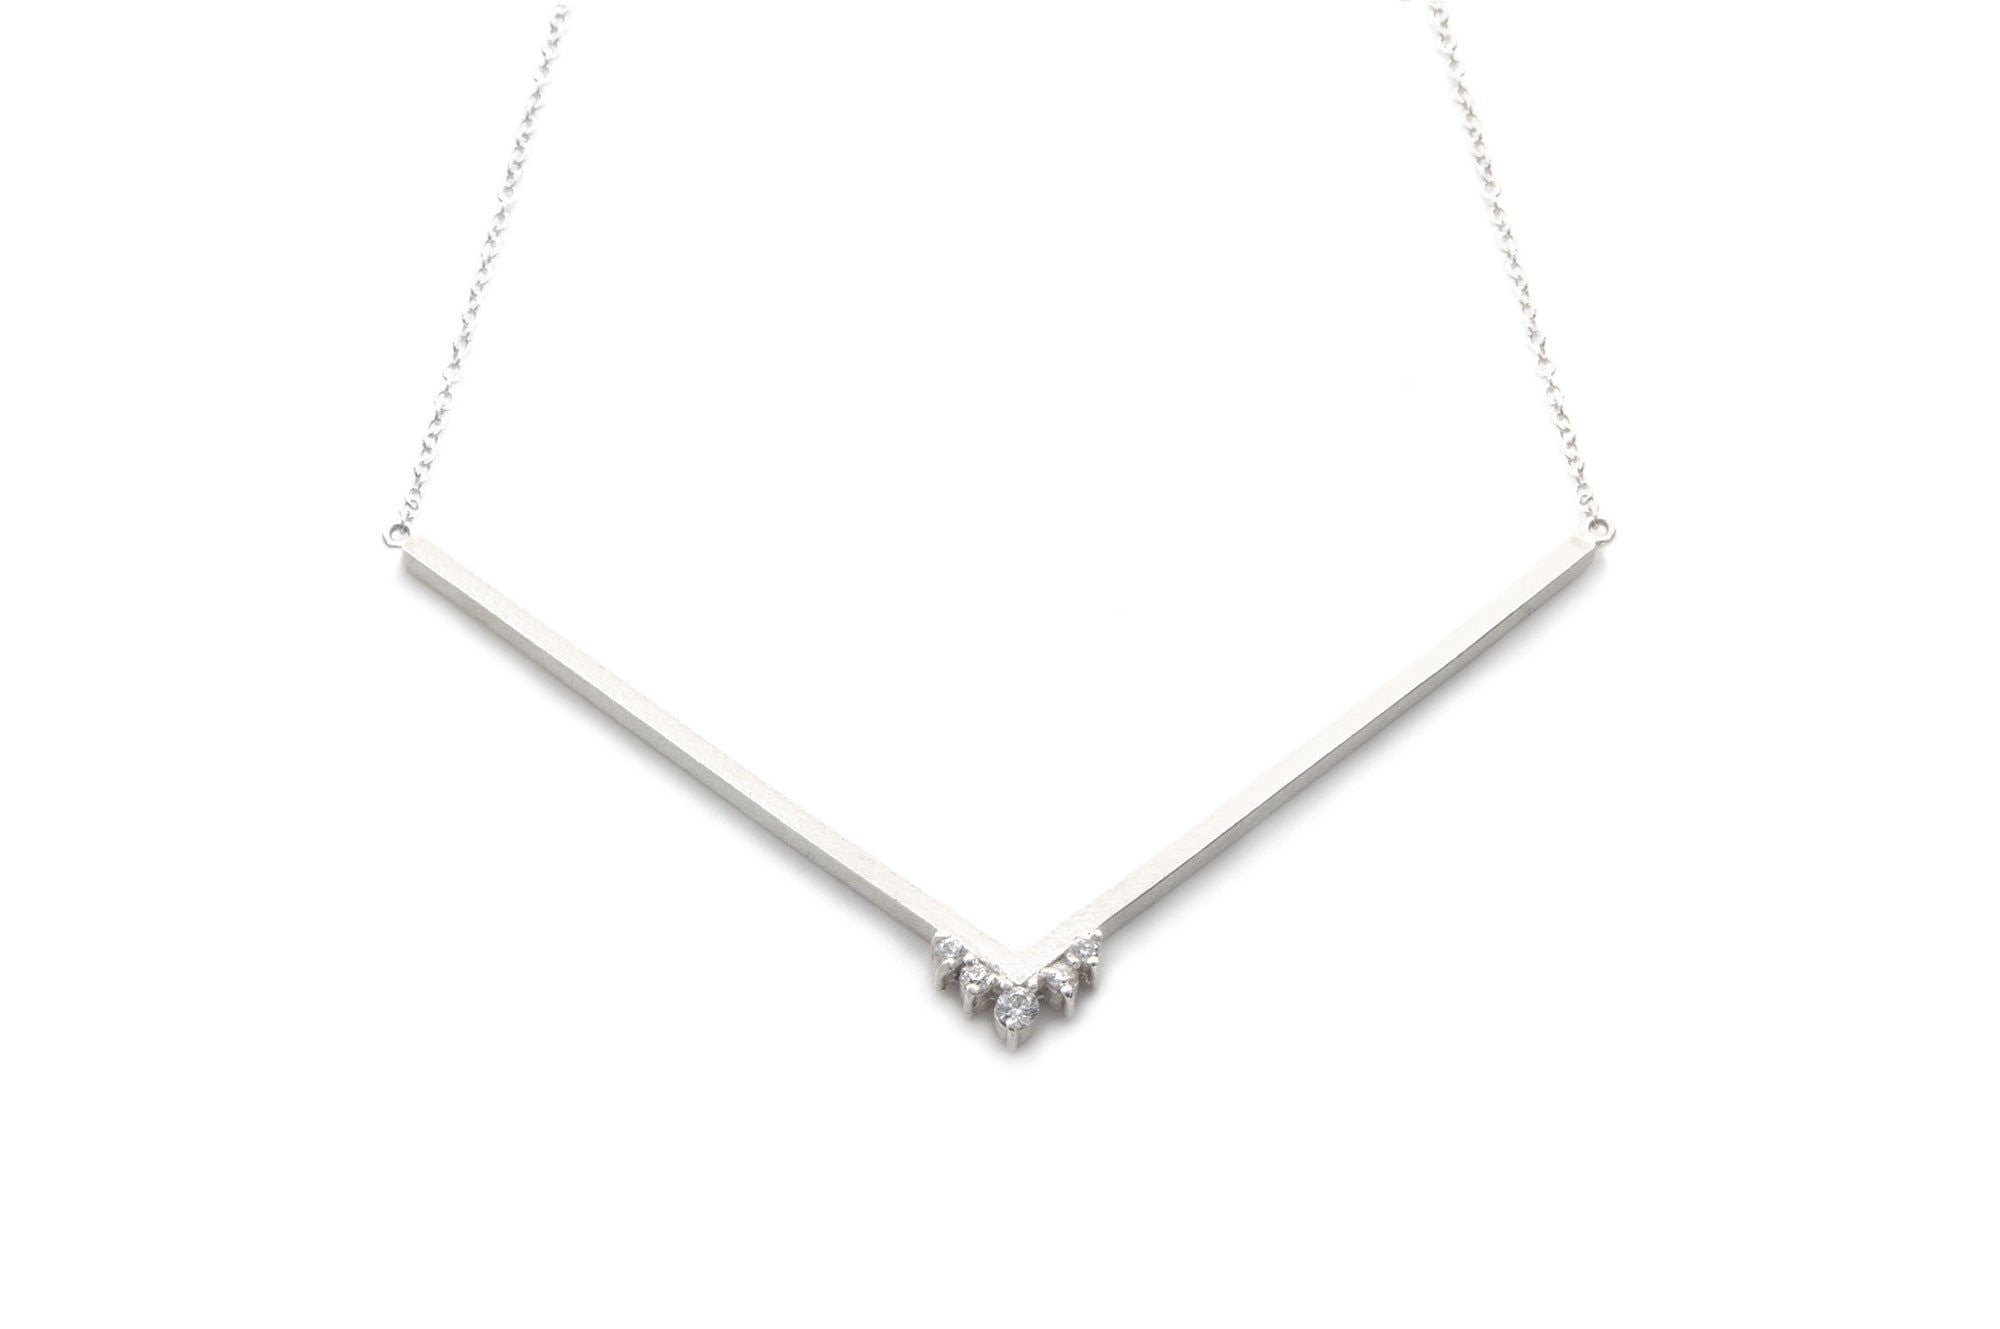 Unique white gold necklace with wide V bar